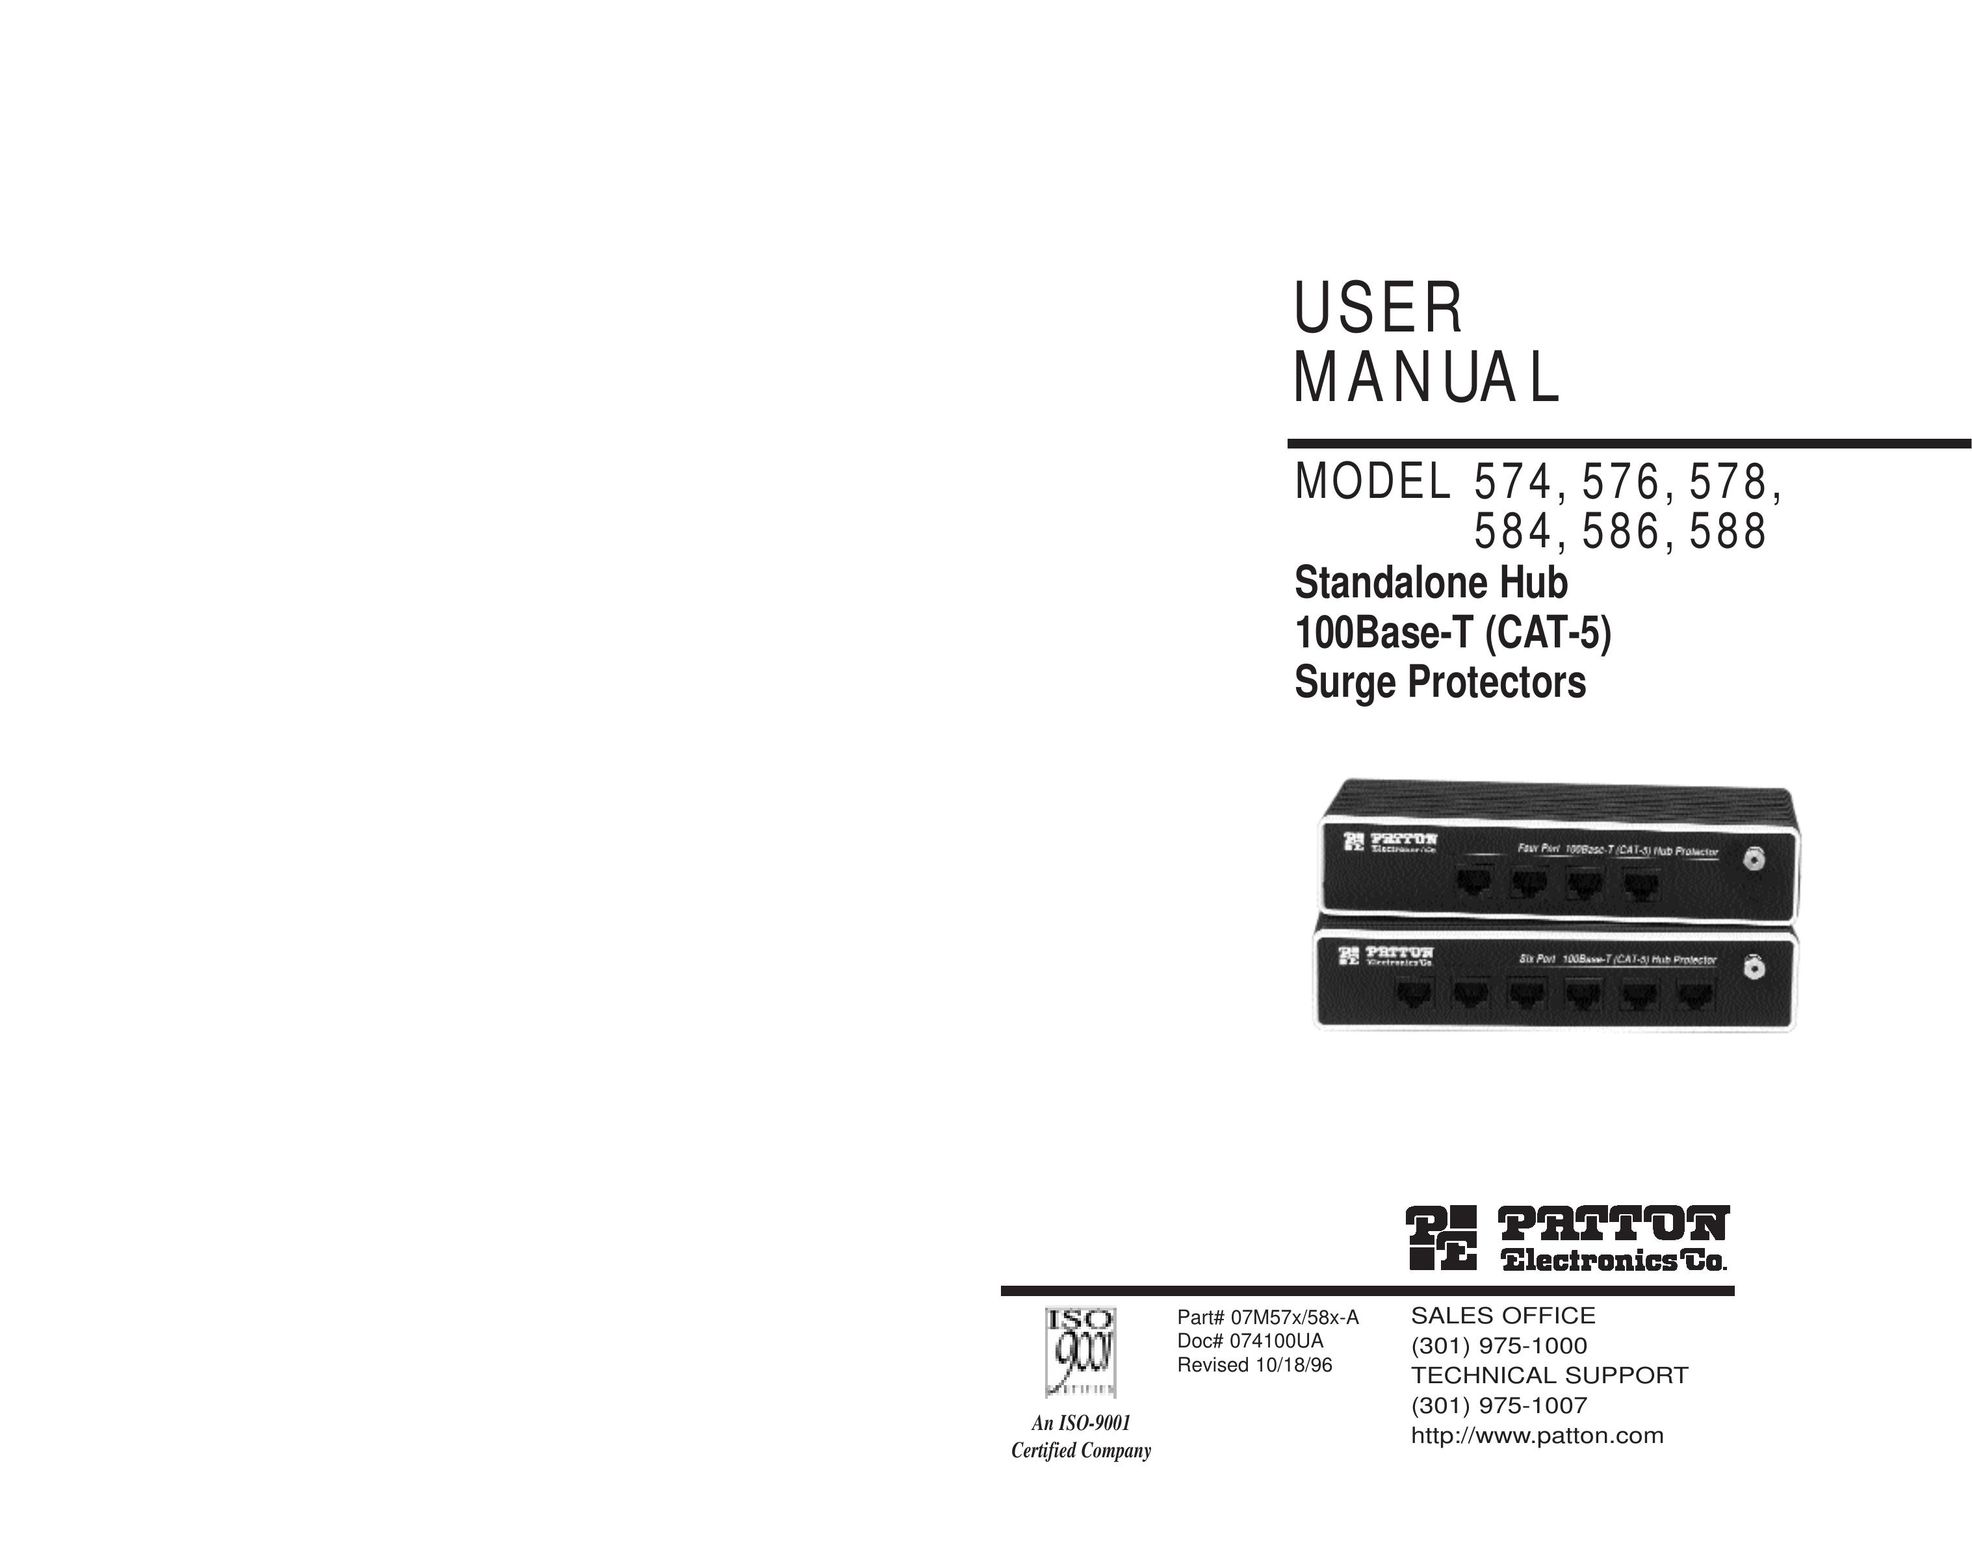 Patton electronic 586 Surge Protector User Manual